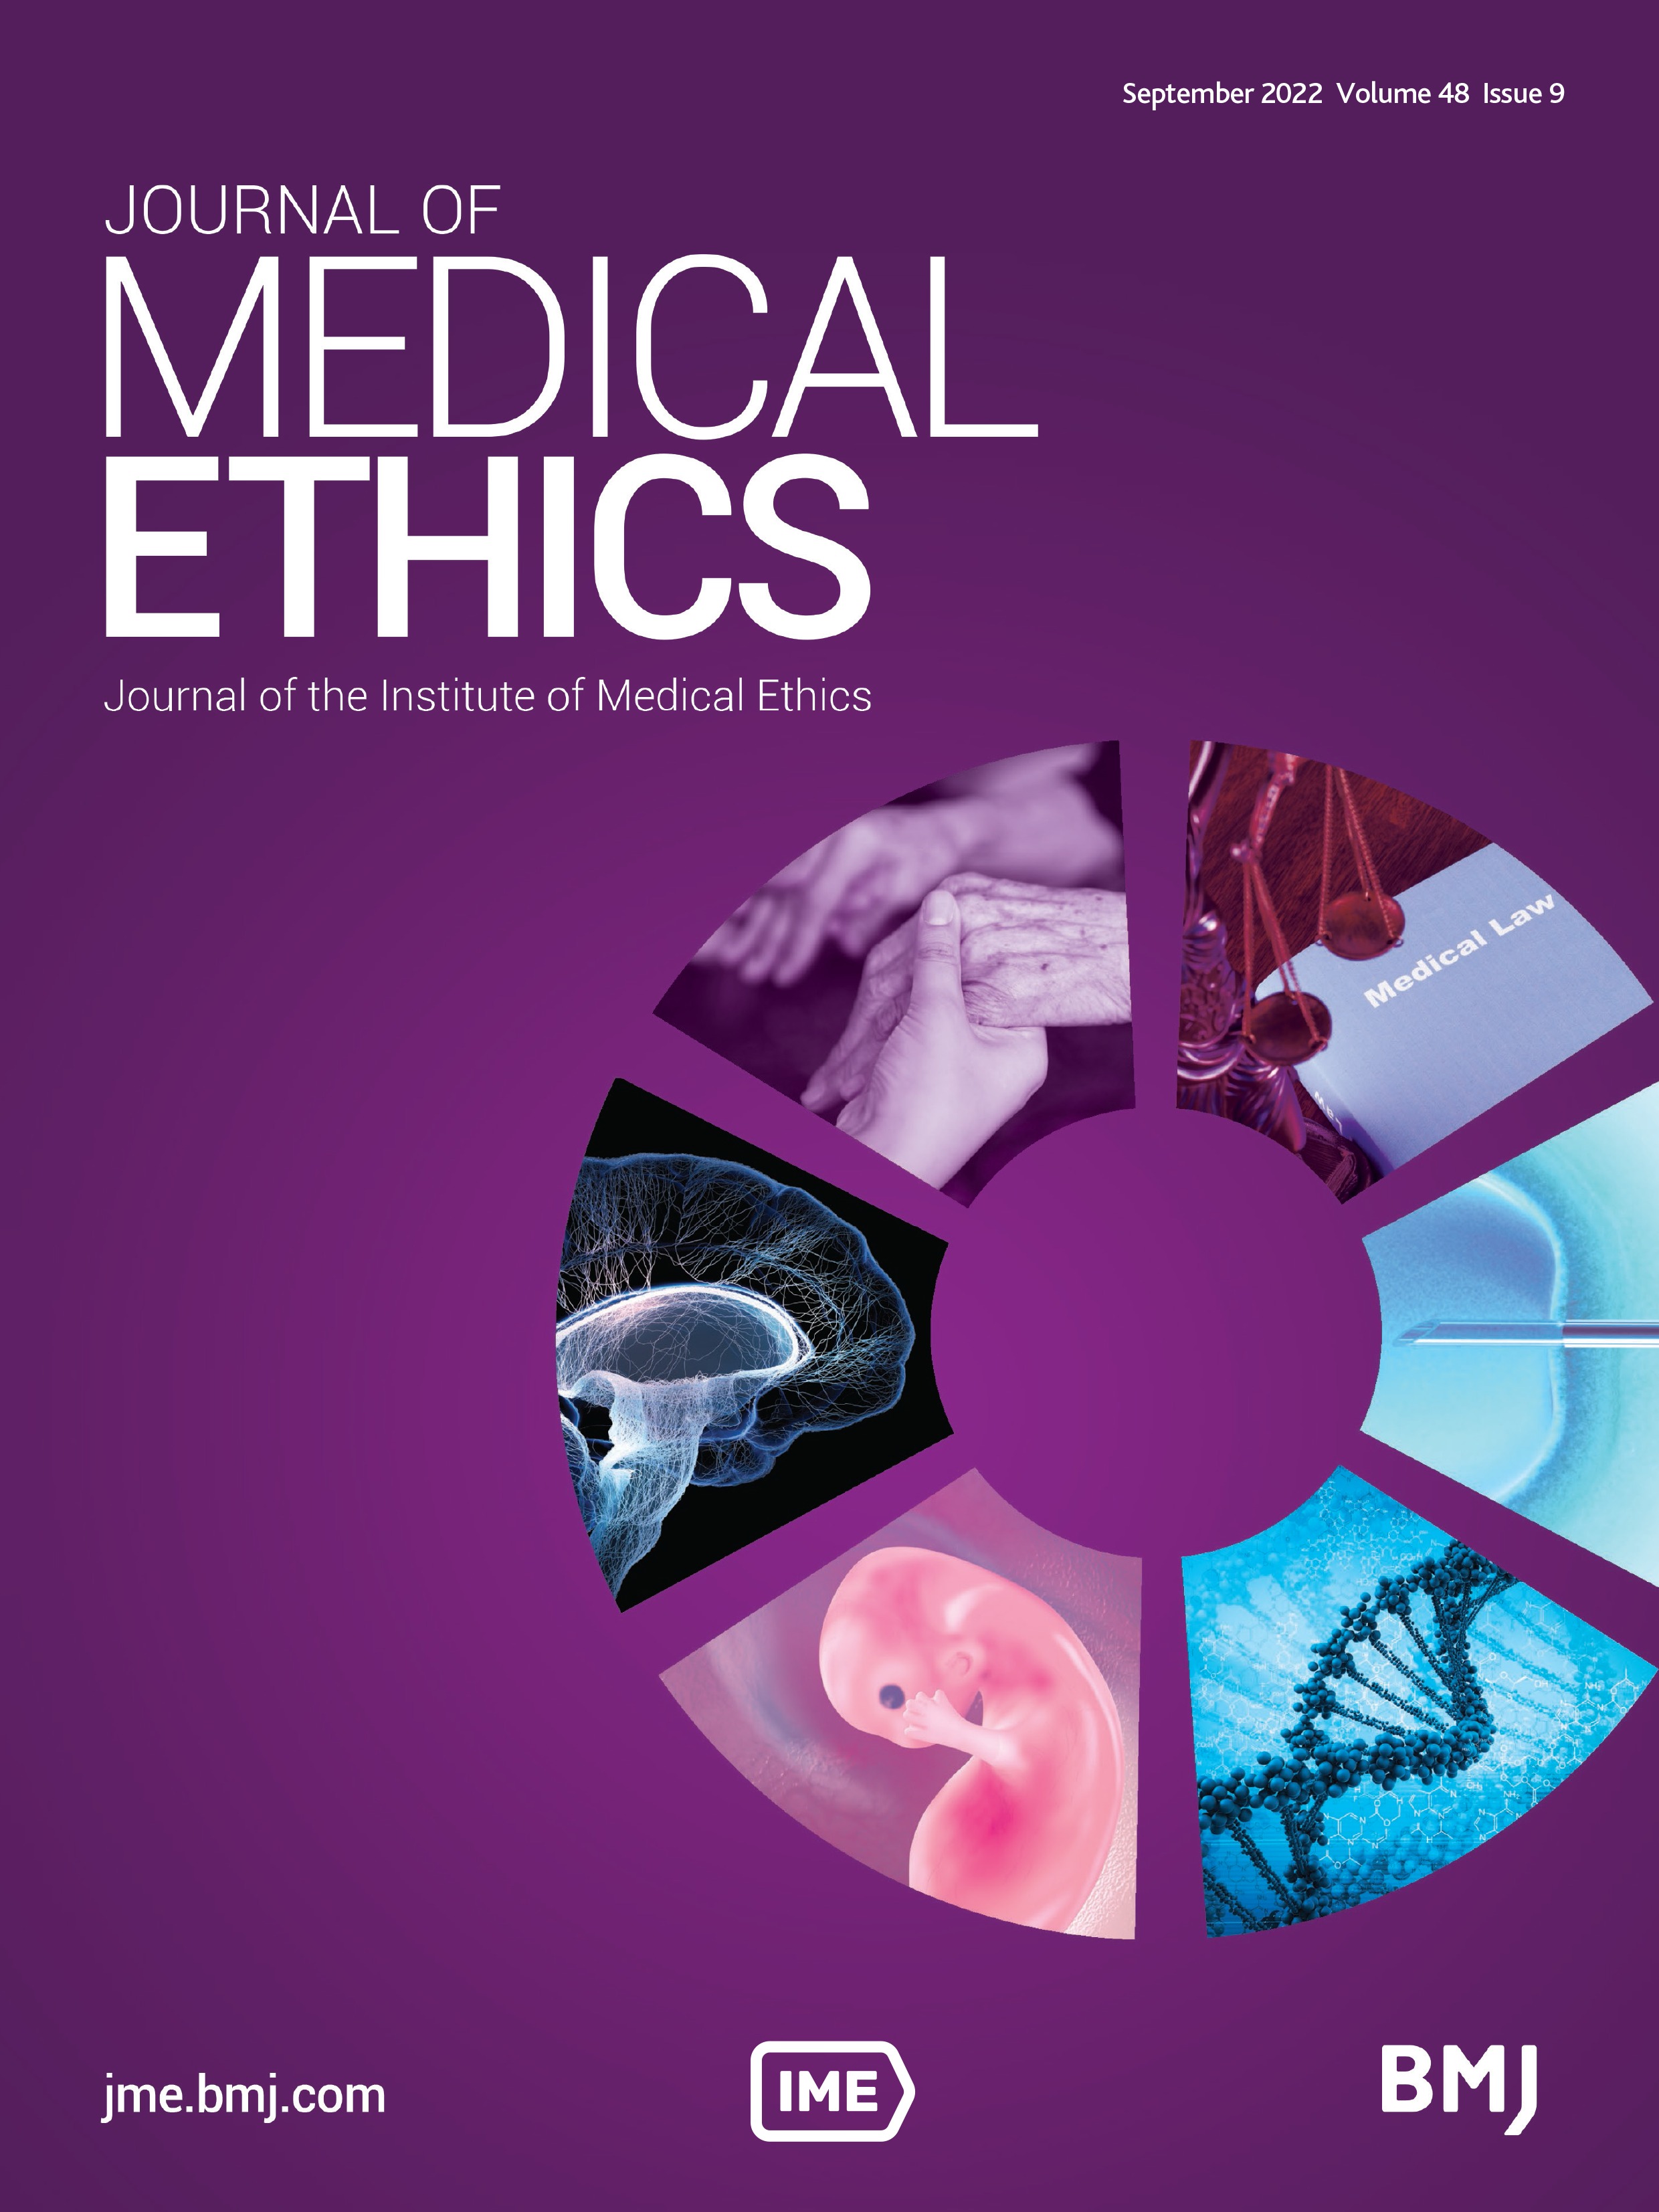 Two dilemmas for medical ethics in the treatment of gender dysphoria in youth